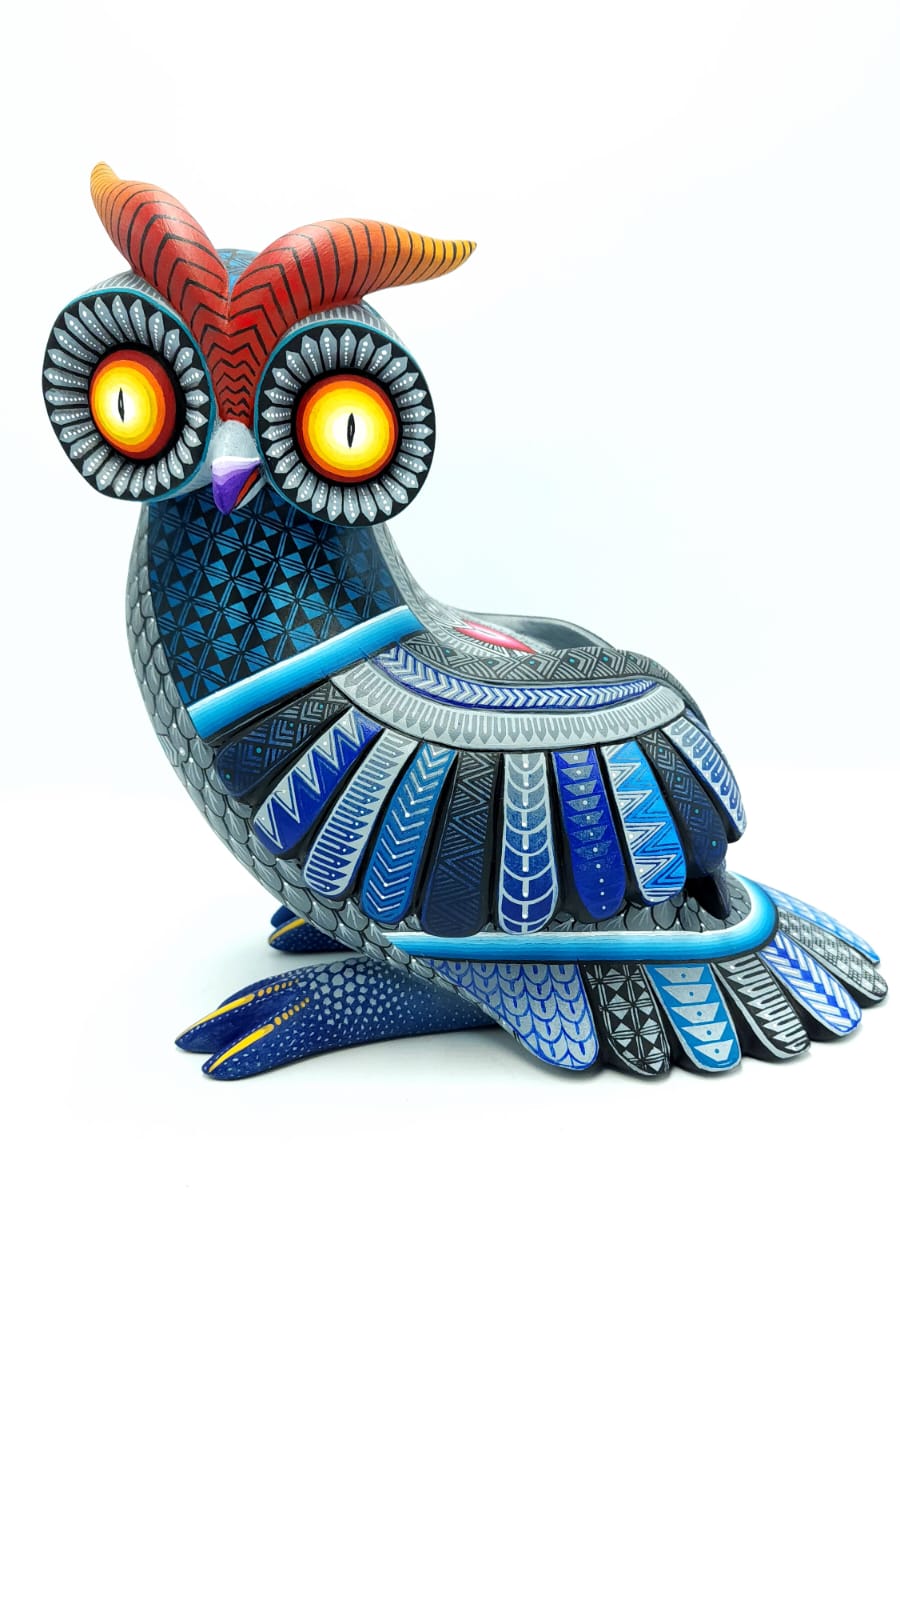 Mexican Oaxacan Wood Carving Owl By Julia Fuentes PP4922